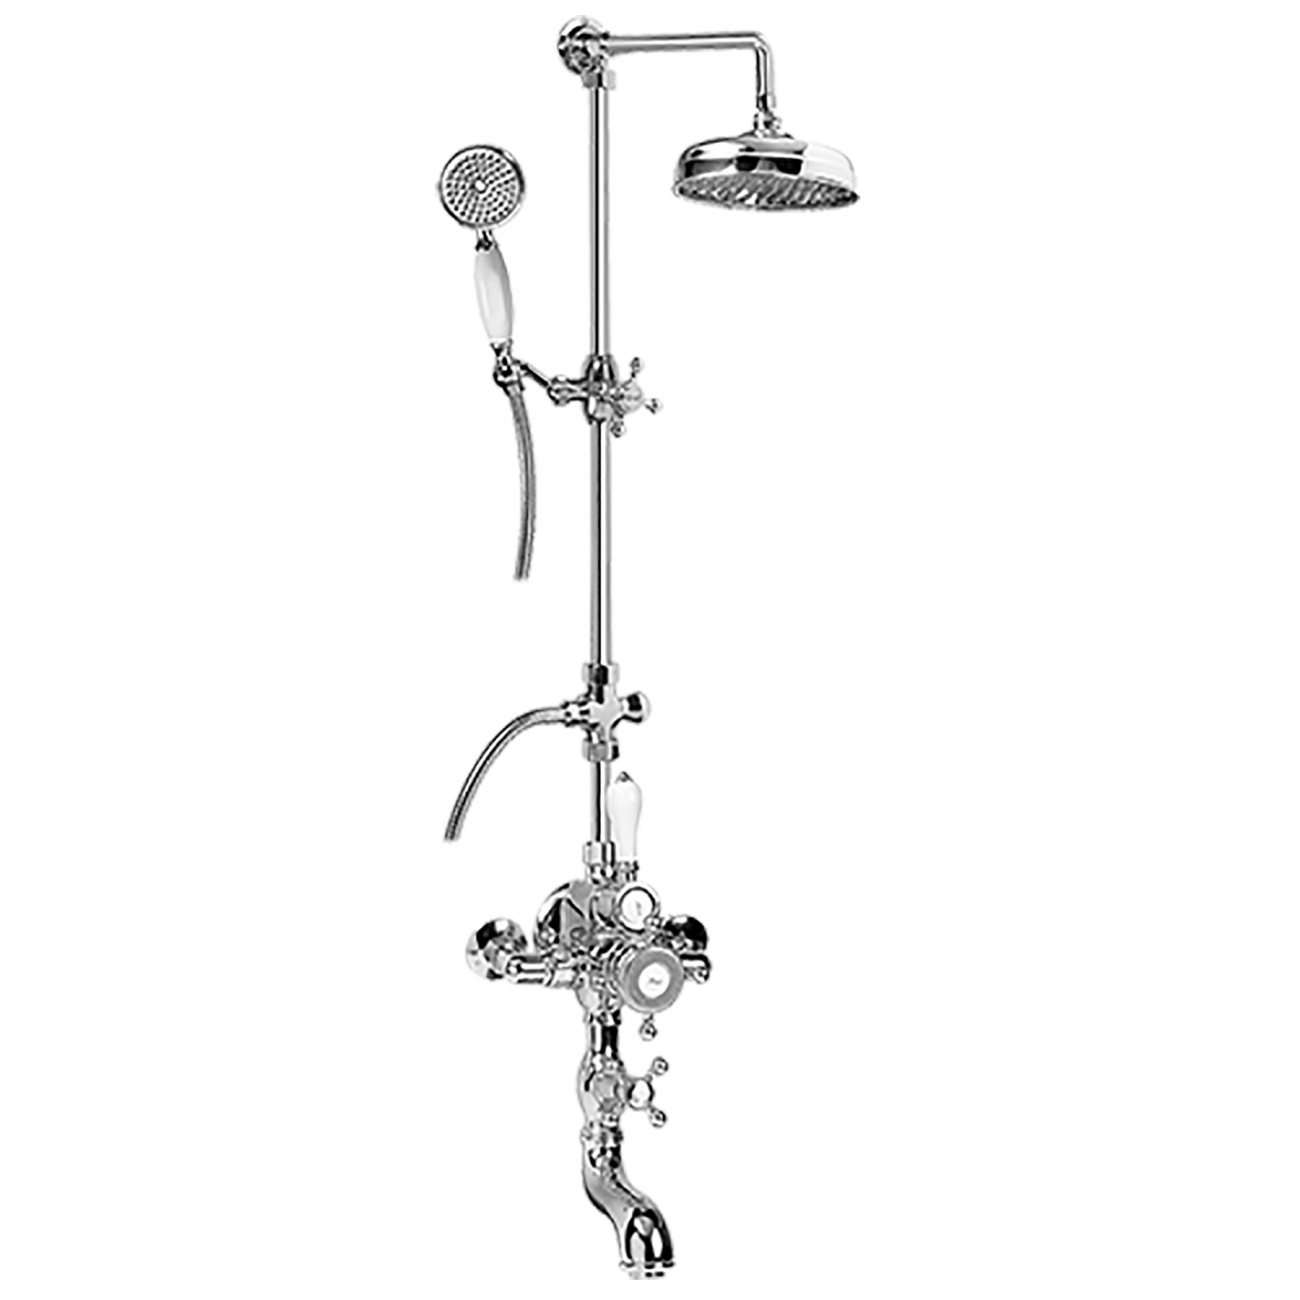 Graff Adley wall mounted thermostatic shower column